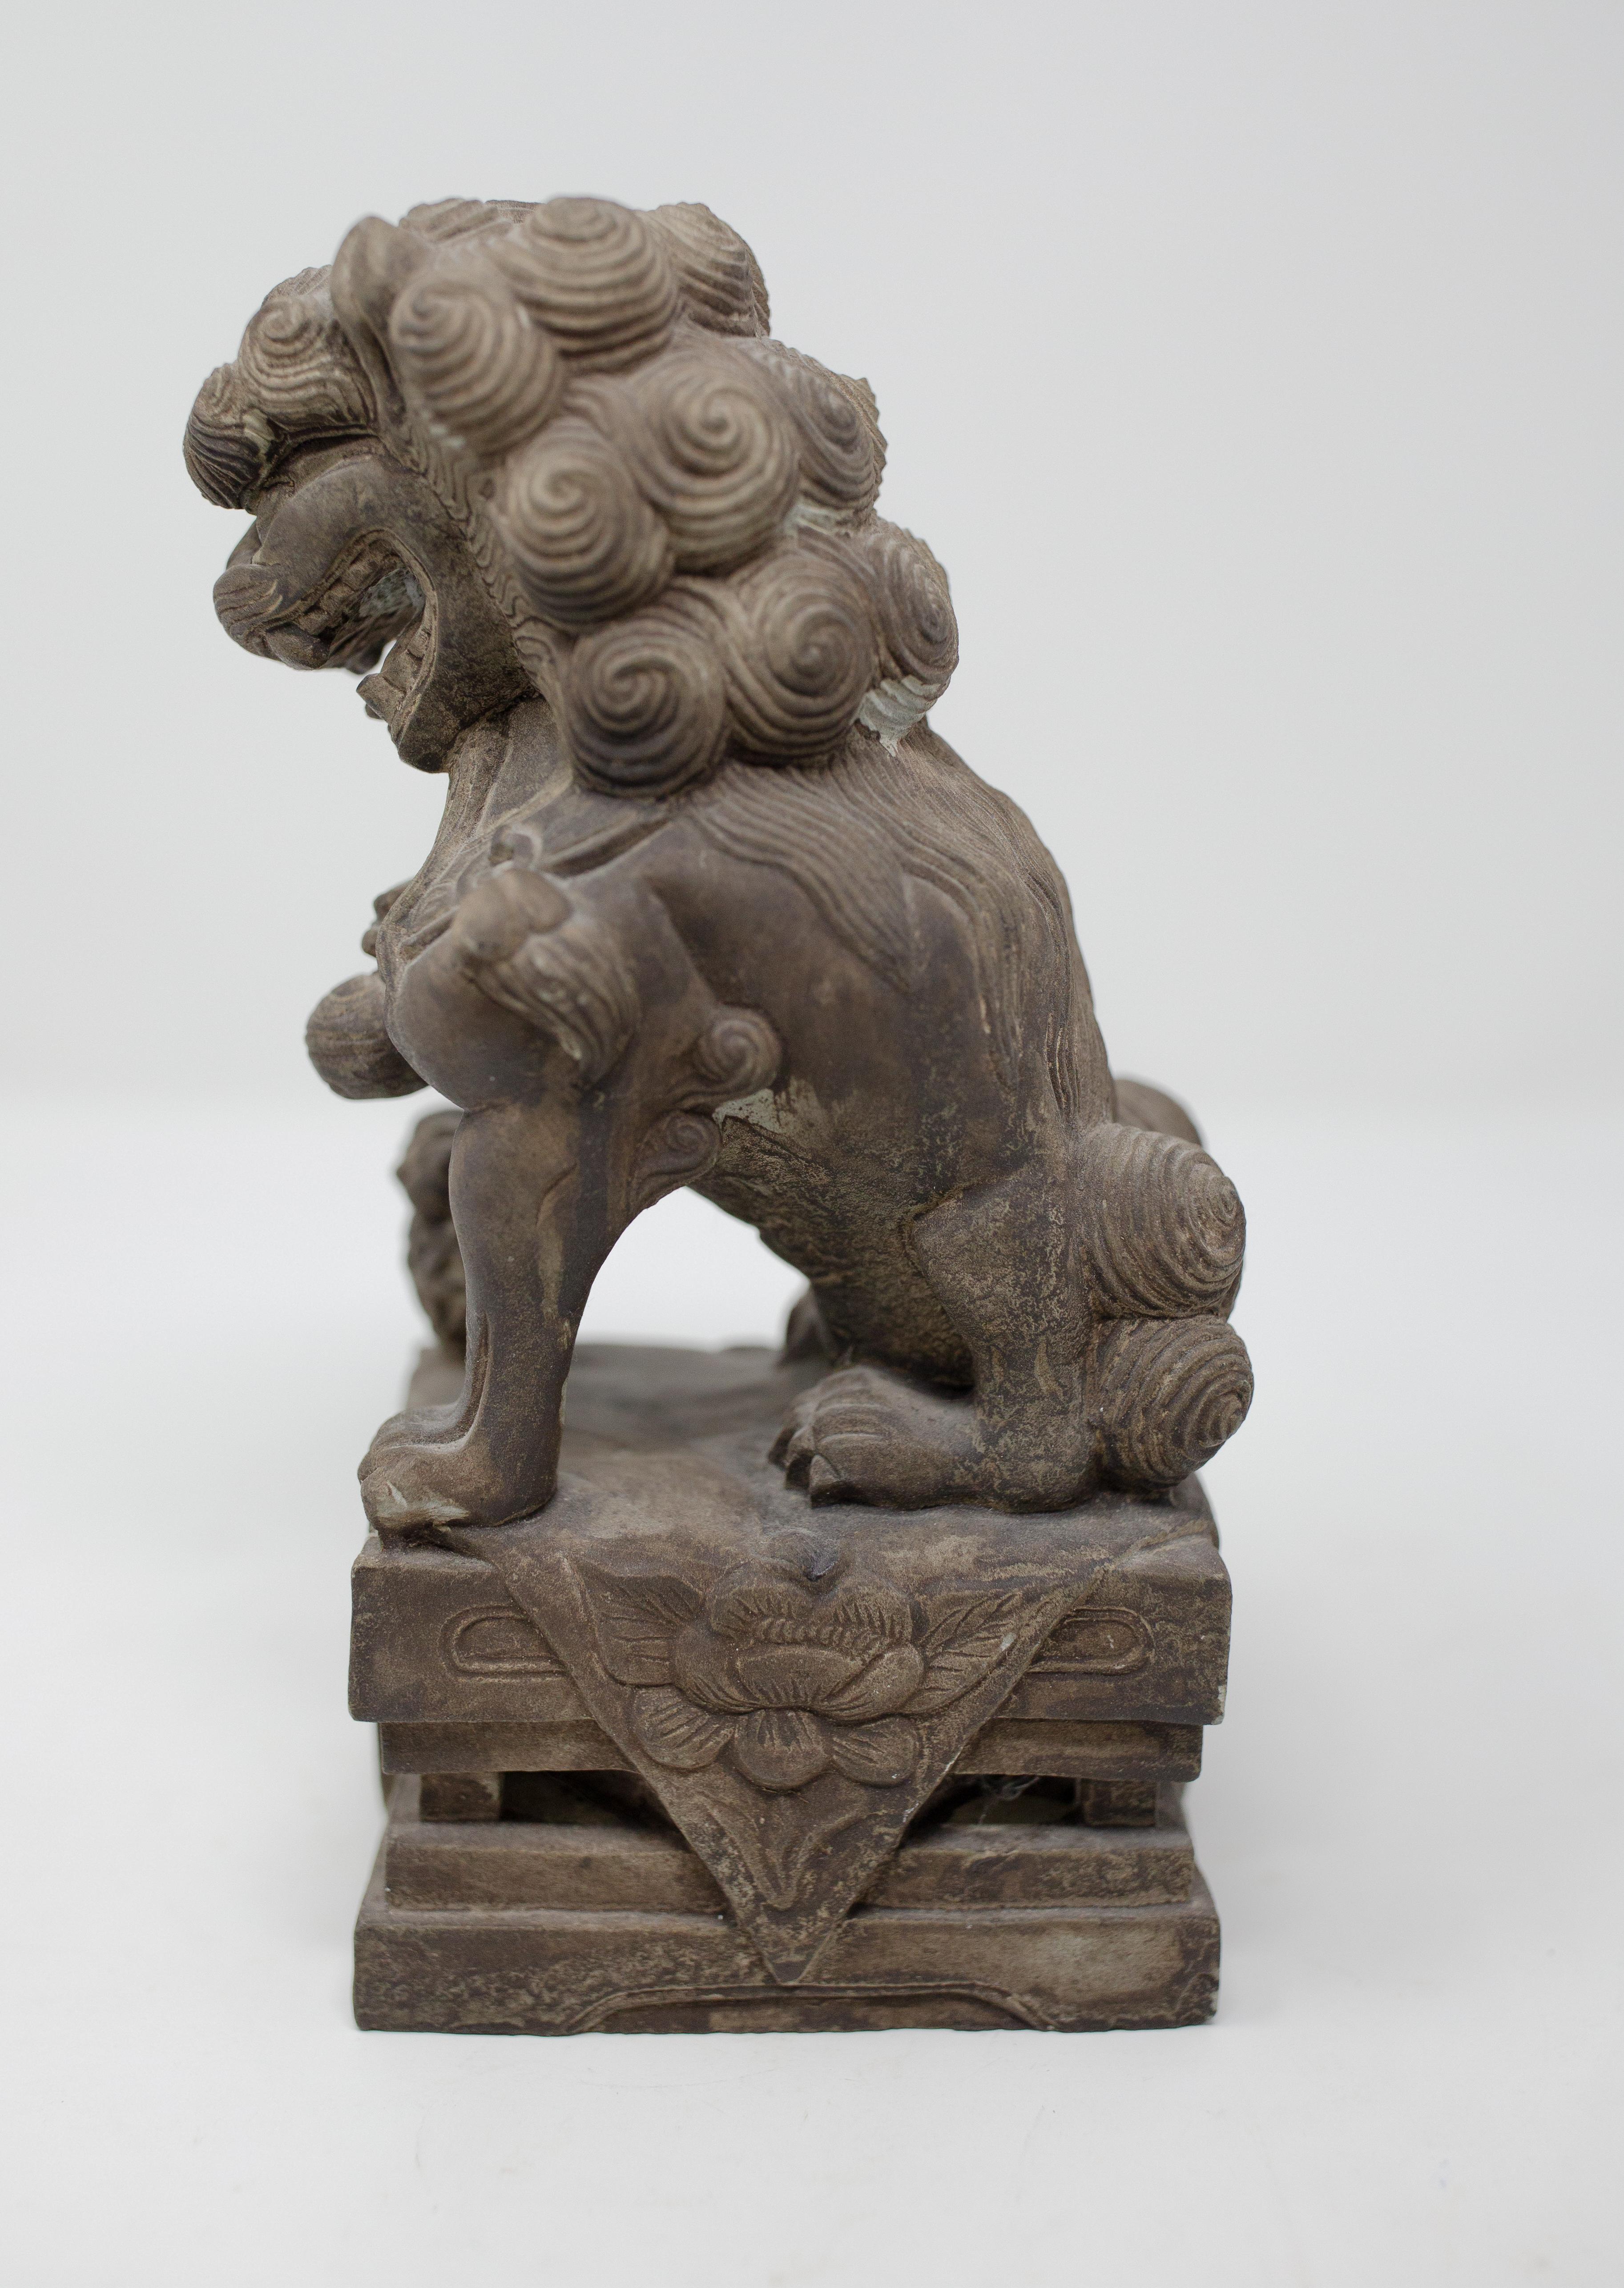 Offering this stunning hand carved Chinese stone foo dogs. Hand carved with all the intricate details on the body of the foo dog. The foo dog is in its standard pose with one foot on a ball. The base has geometric designs with floral motifs and